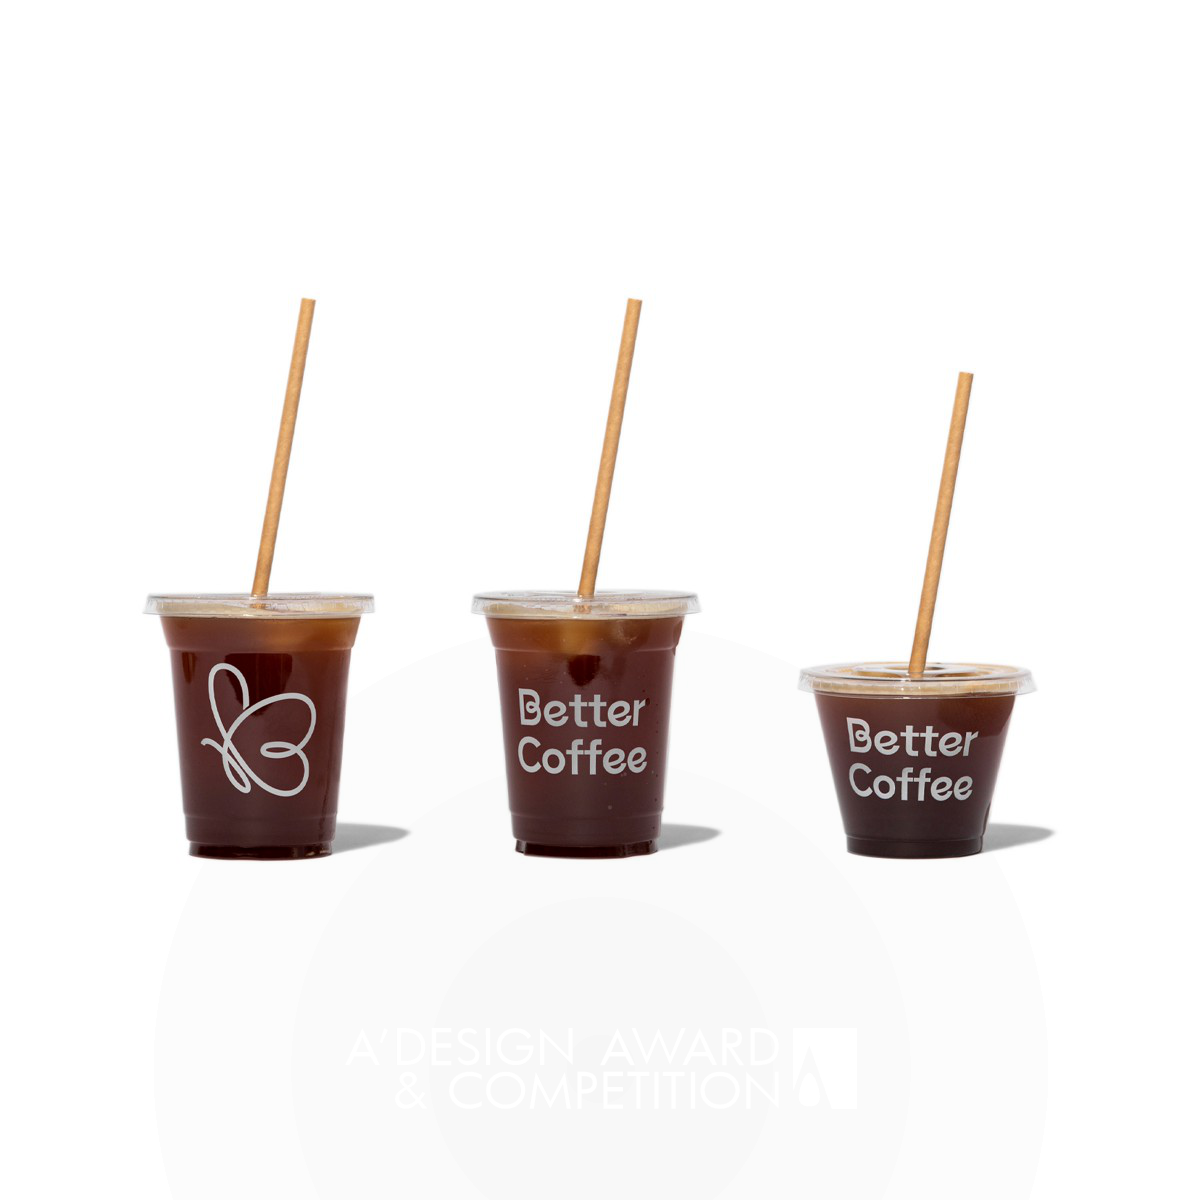 Better Coffee Corporate Identity by Suzhou SoFeng Design Co.,Ltd.